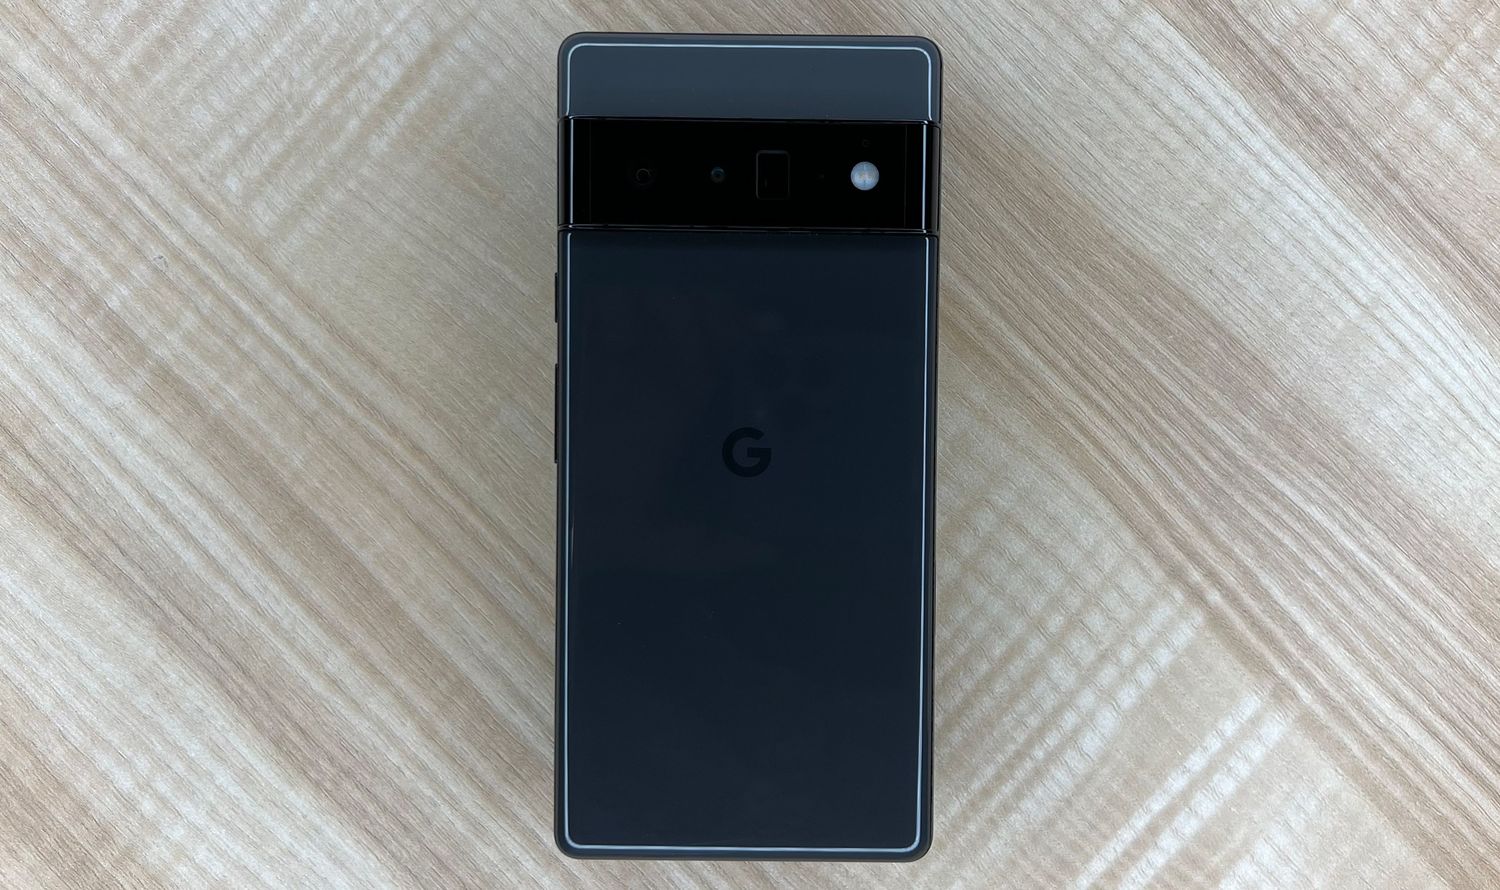 Step-by-Step: Force Shutting Down Your Pixel 6